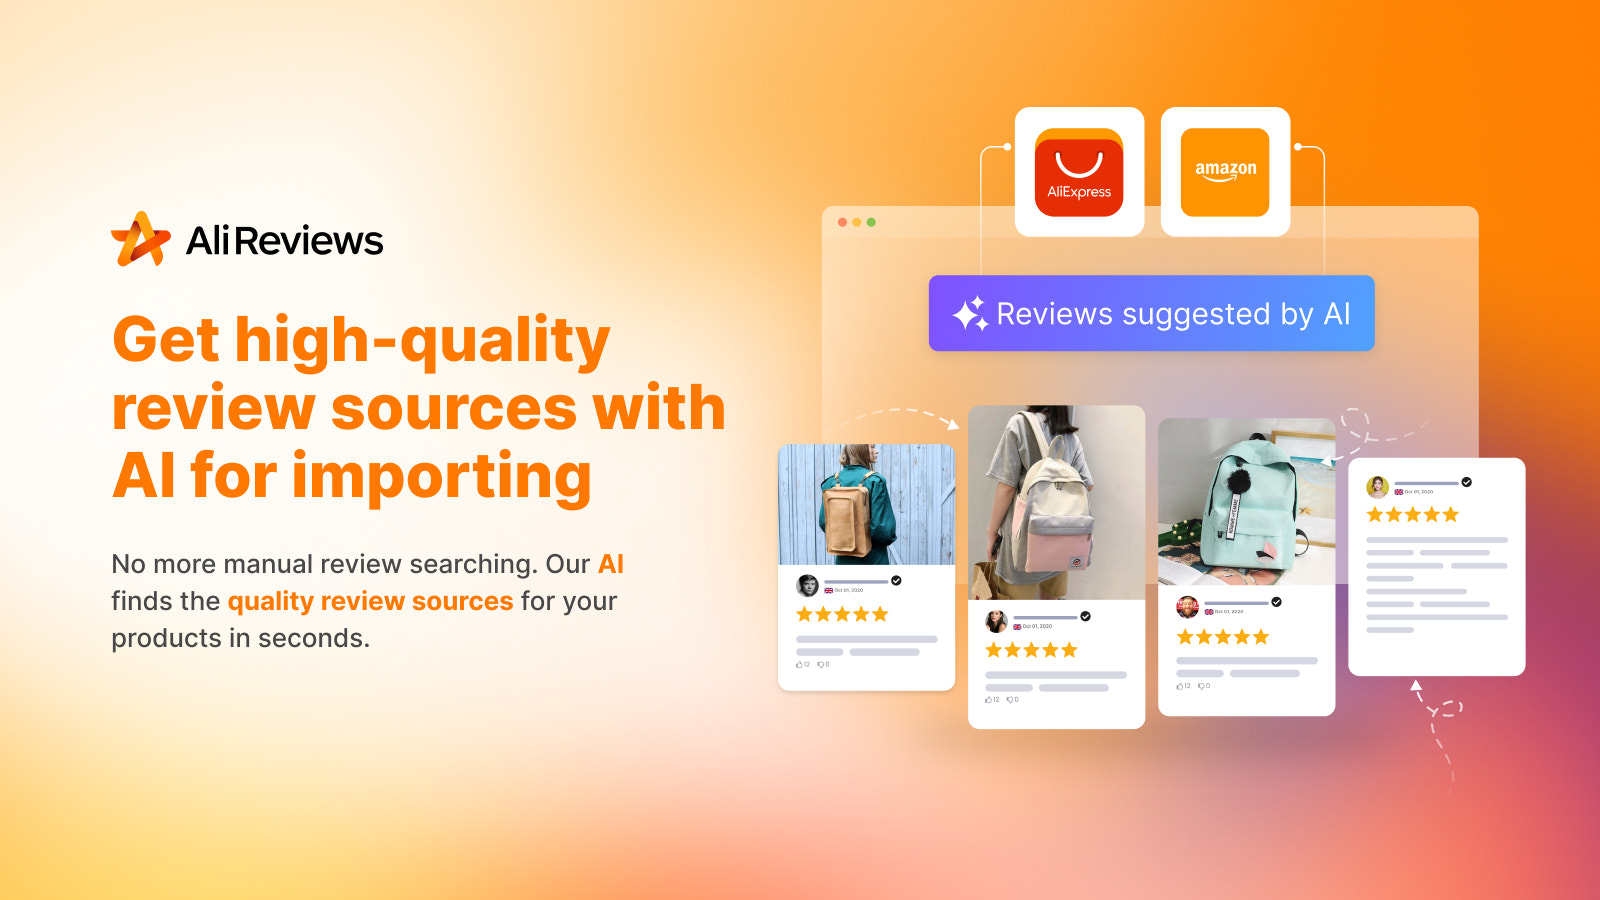 Ali Reviews uses AI to suggest quality review sources